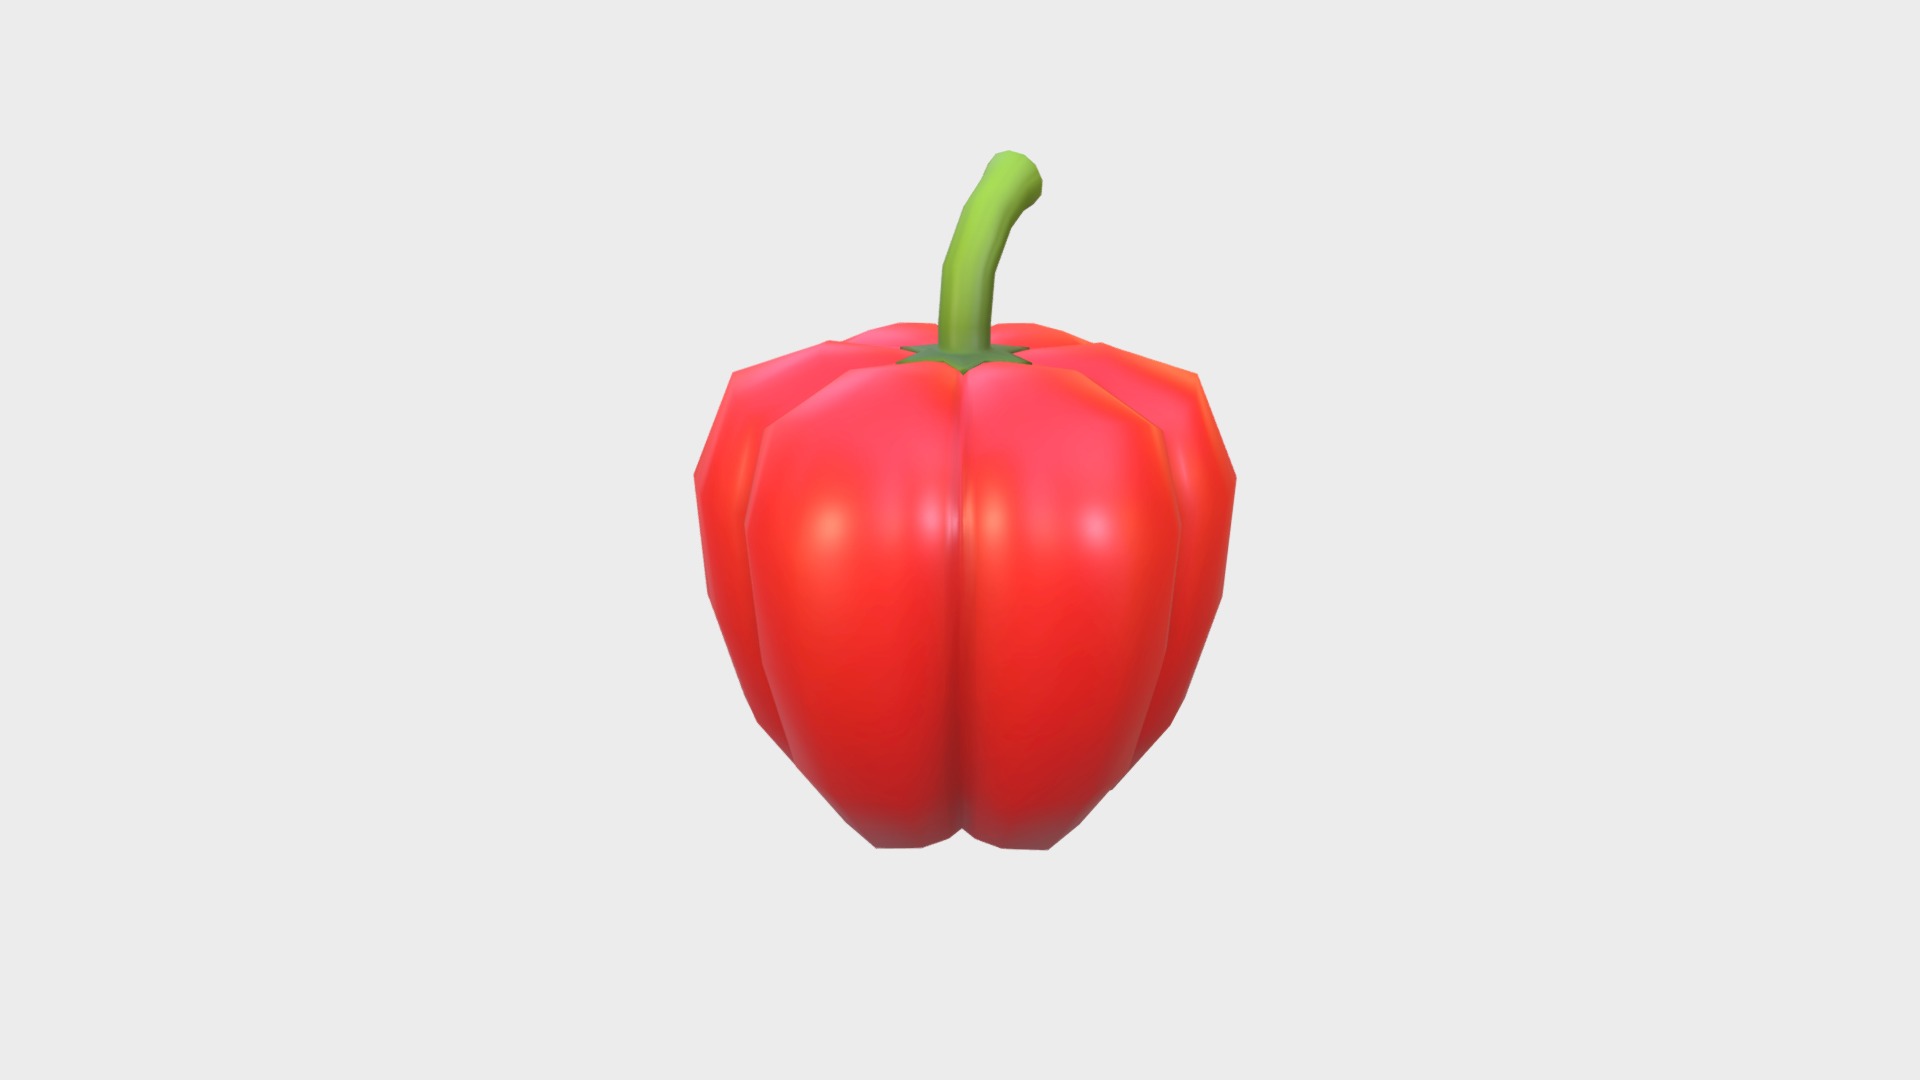 3D model Pepper - This is a 3D model of the Pepper. The 3D model is about a red apple with a green stem.